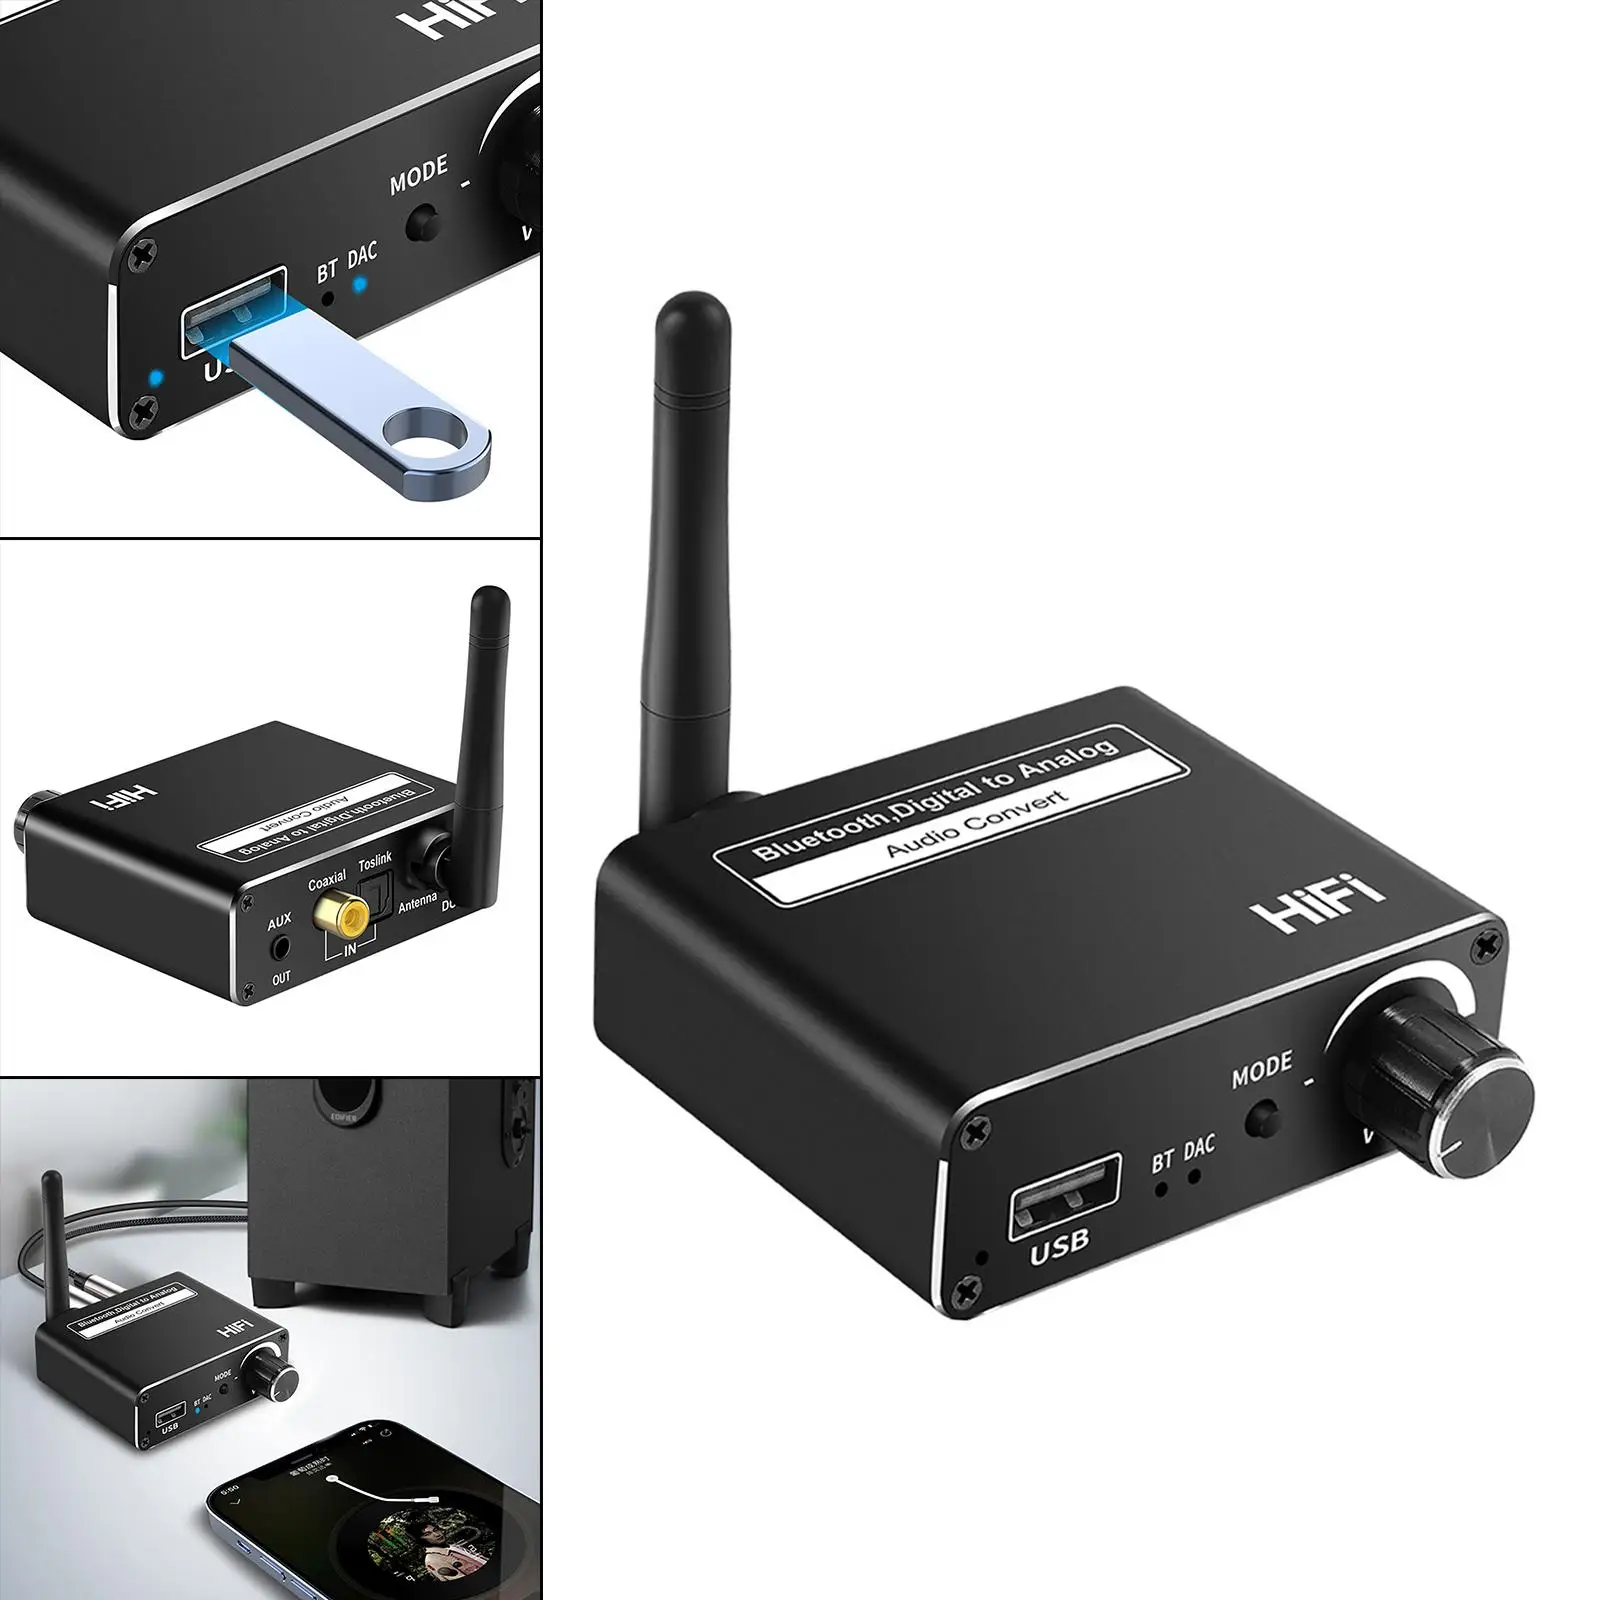  USB Playback AUX Optical  Player Digital to Analog Converter, Multi-device Expansion